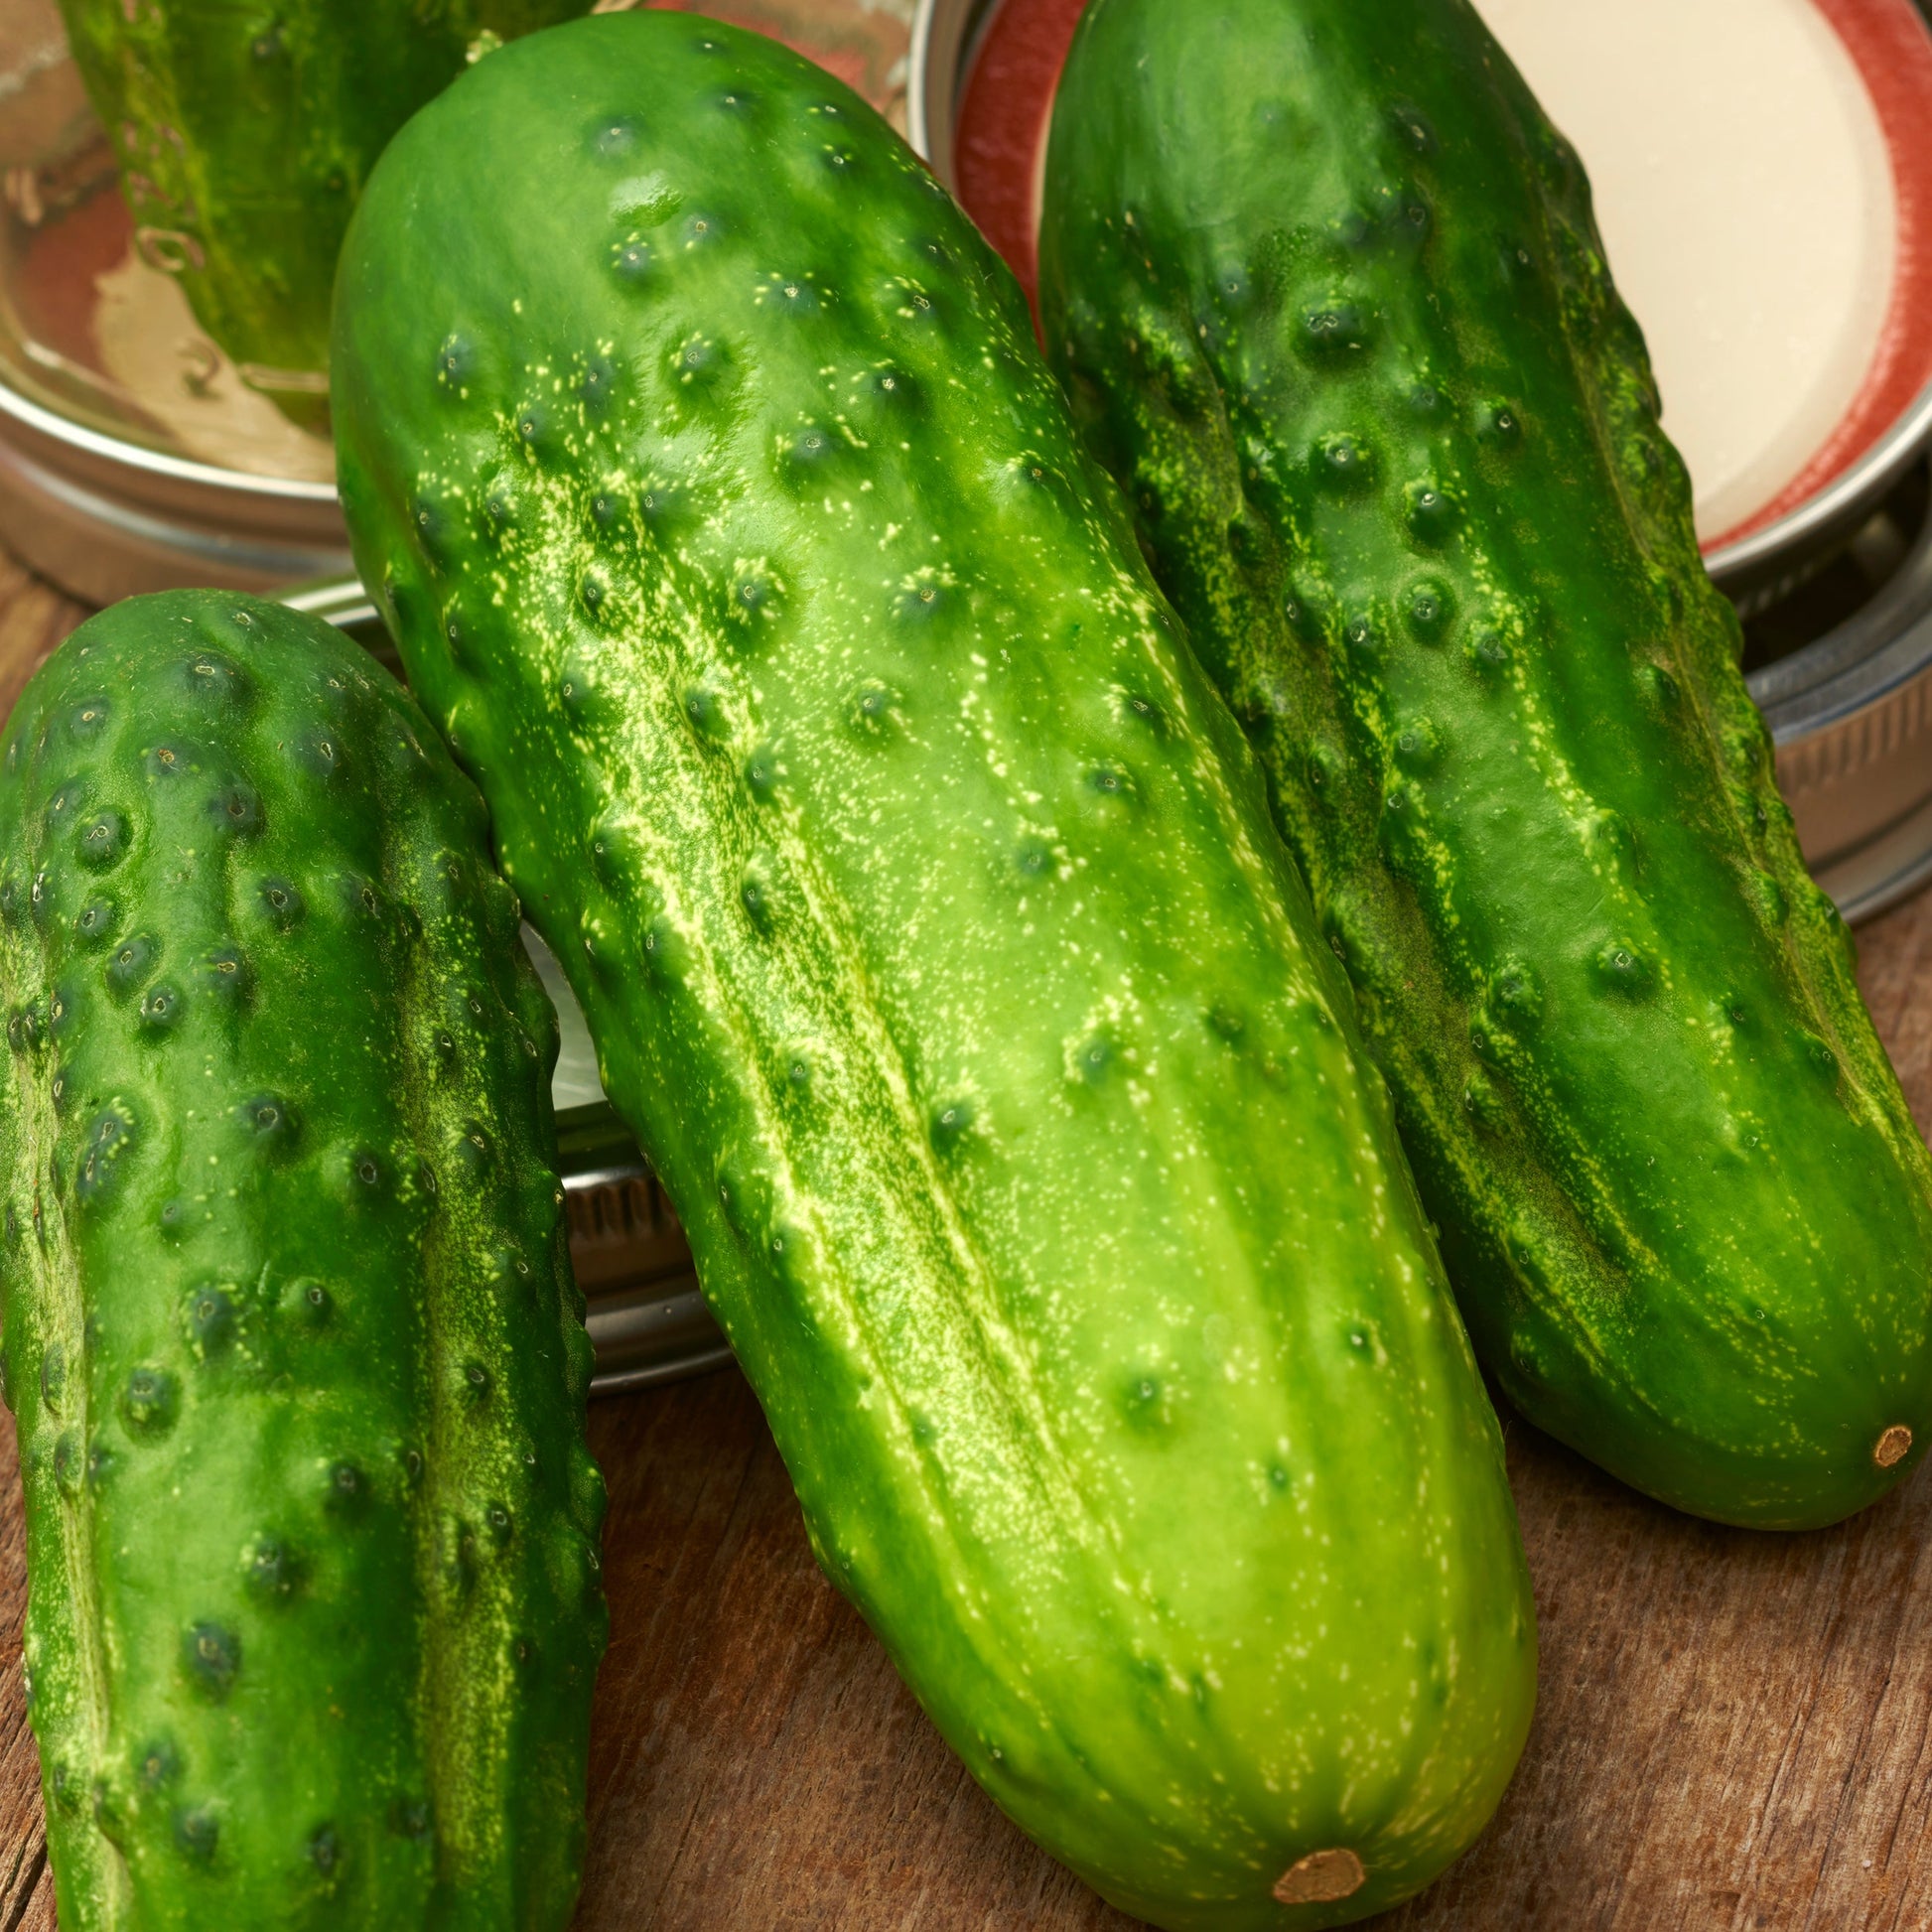 Boston Pickling Cucumber fully matured and freshly harvested. Picture is close-up of cucumbers, vibrant green colors.